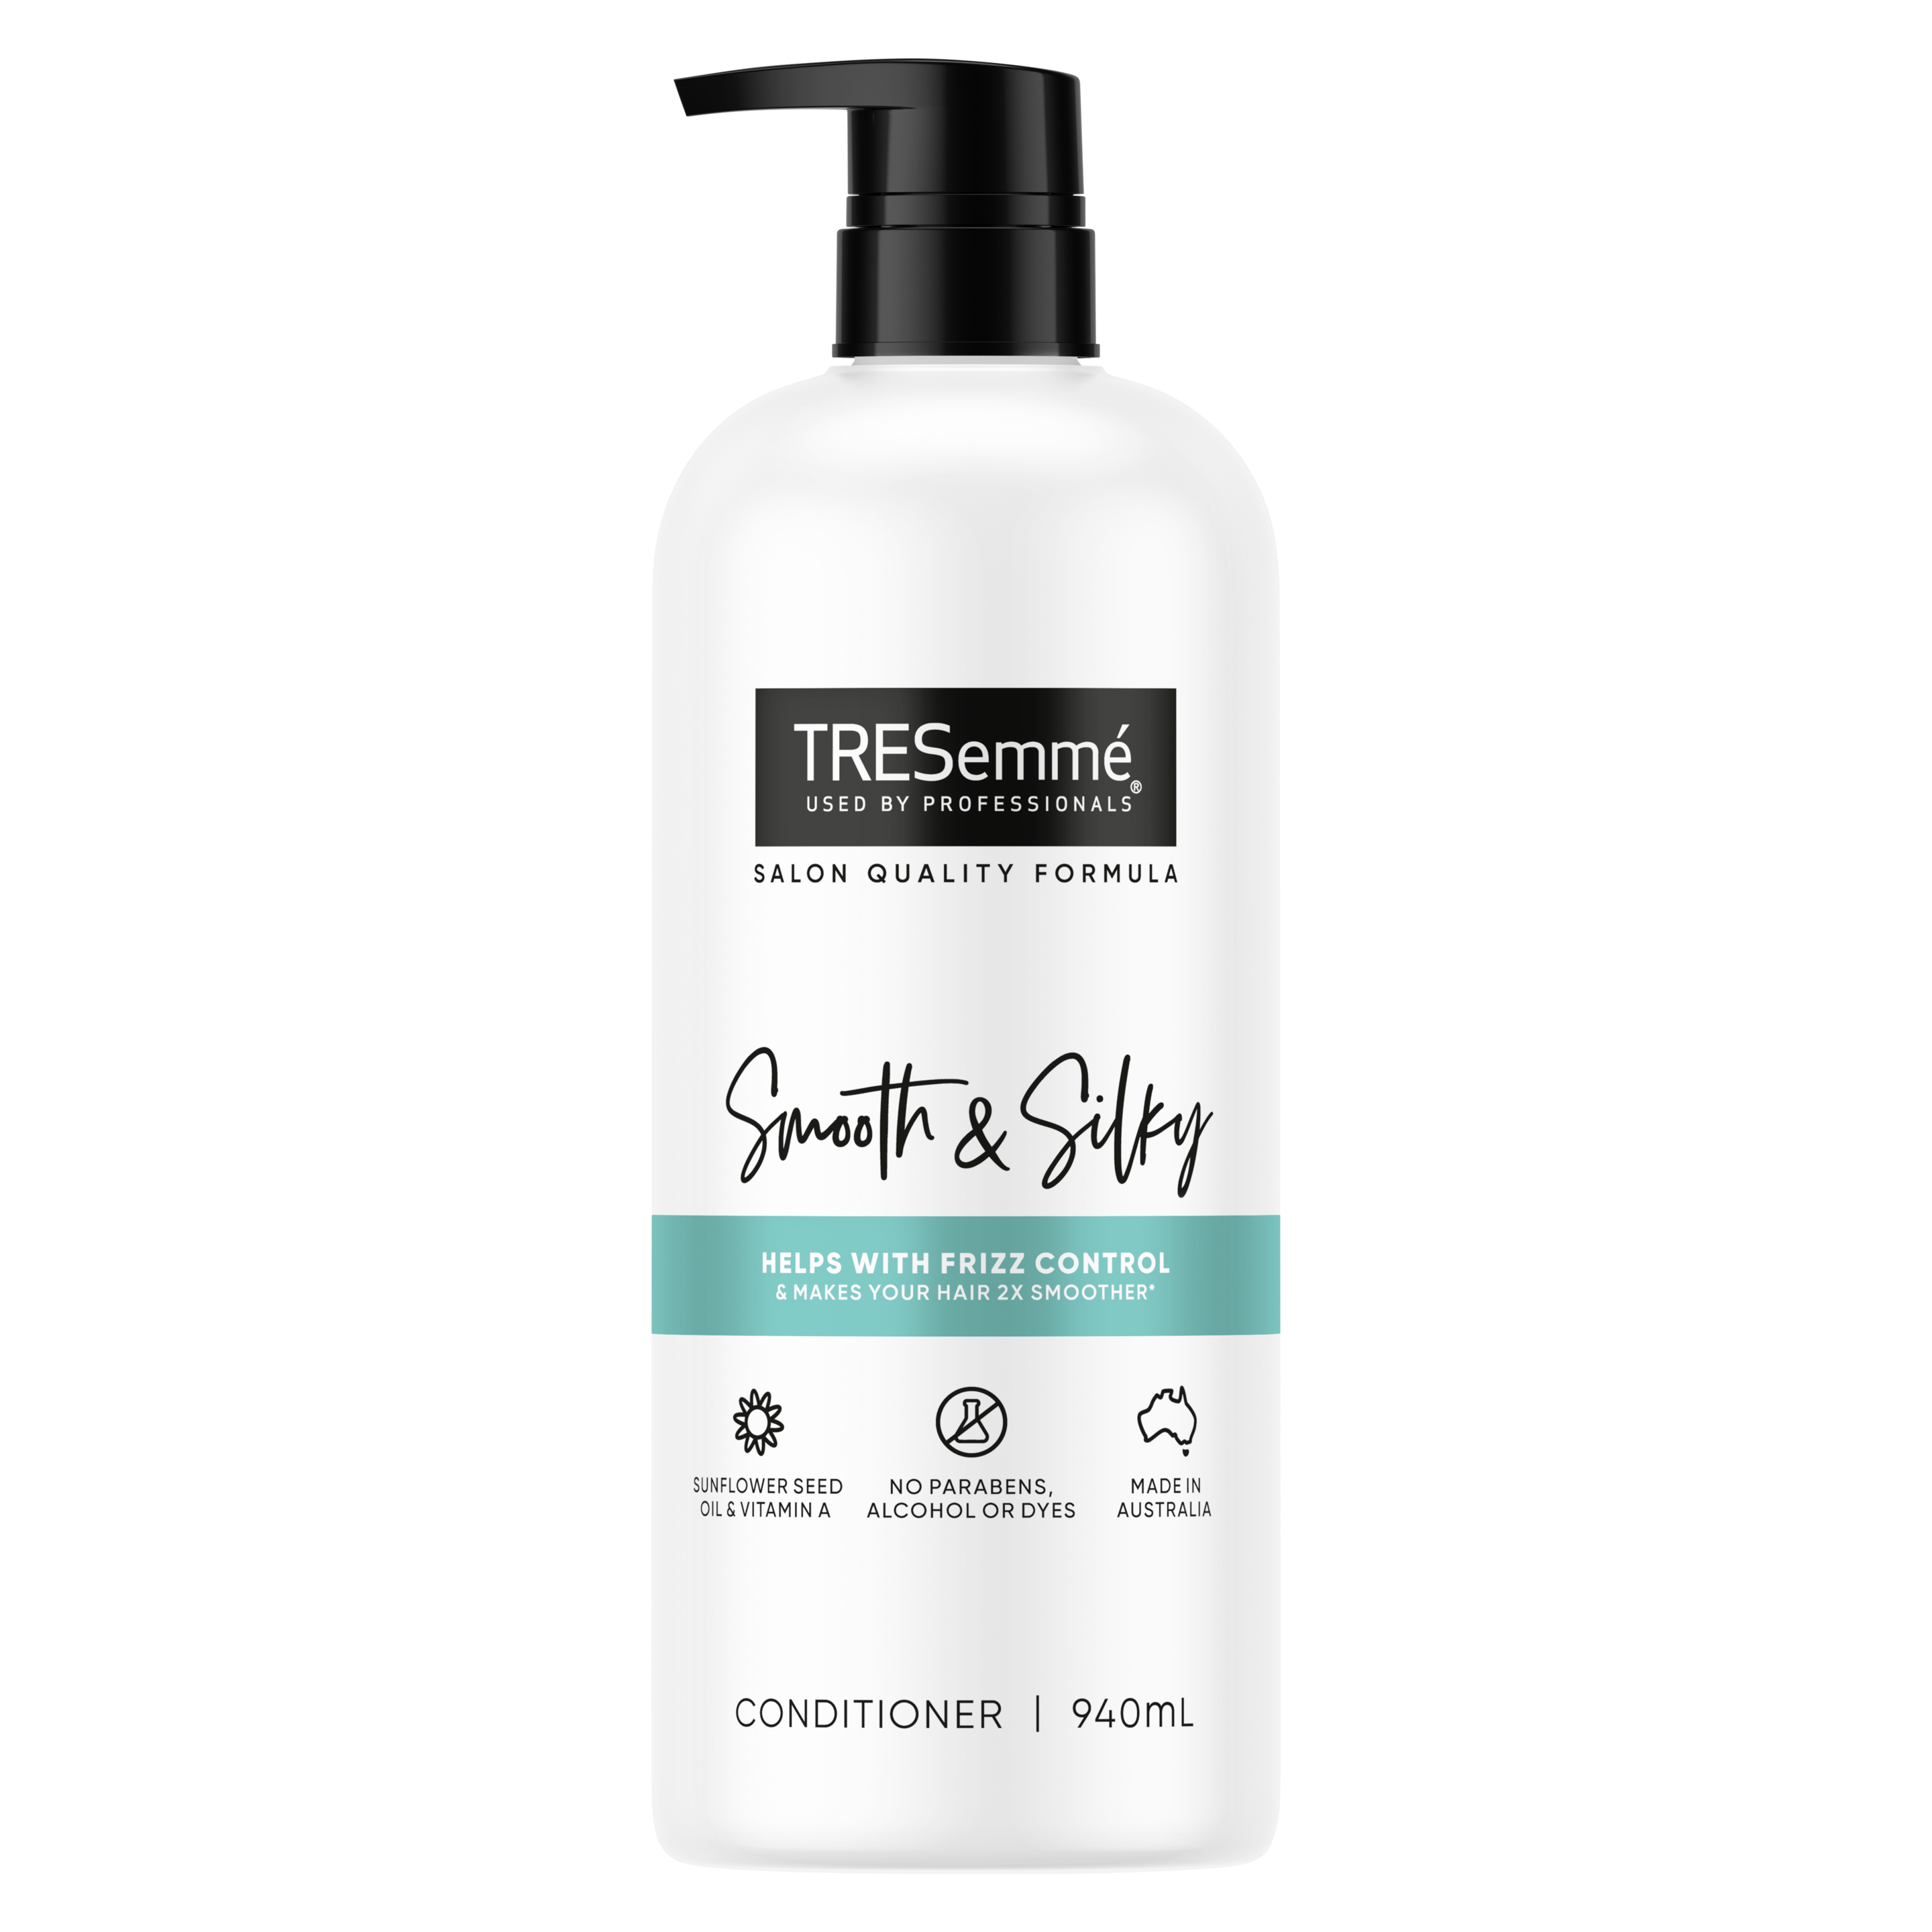 A 940ml bottle of TRESemmé Smooth & Silky Conditioner